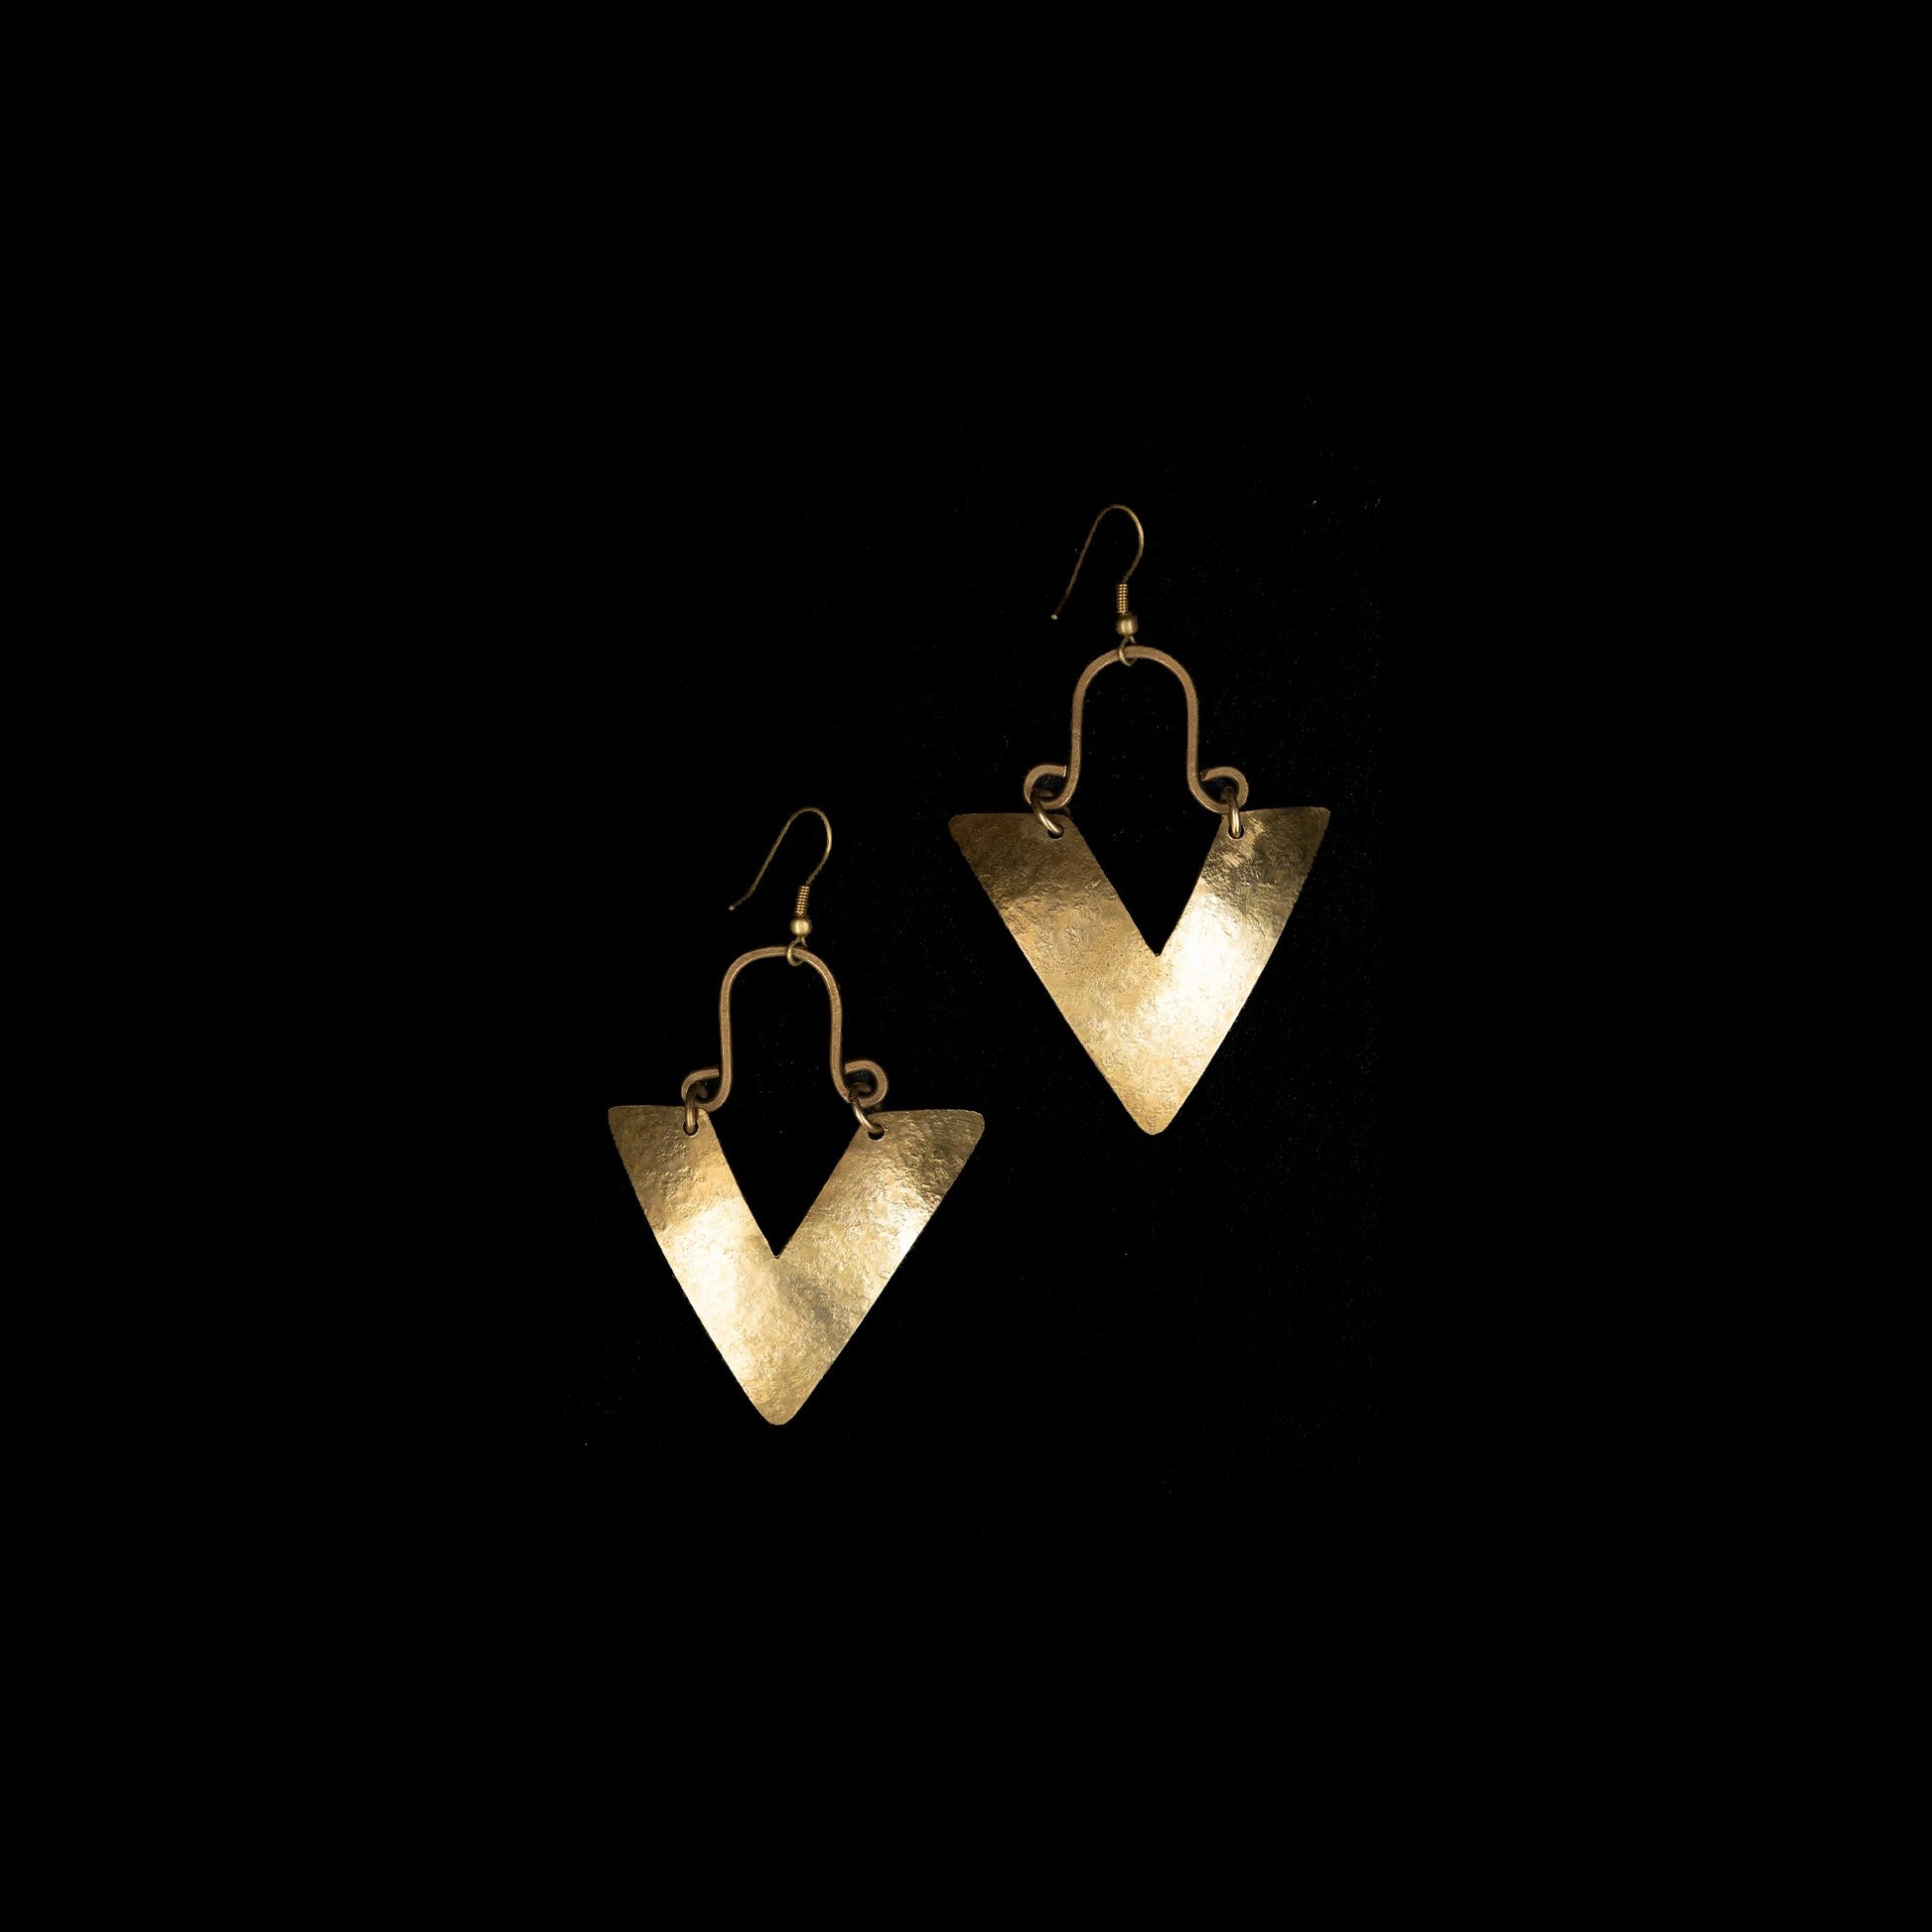 Simple brass African Earrings - Authentic African handicrafts | Clothing, bags, painting, toys & more - CULTURE HUB by Muthoni Unchained